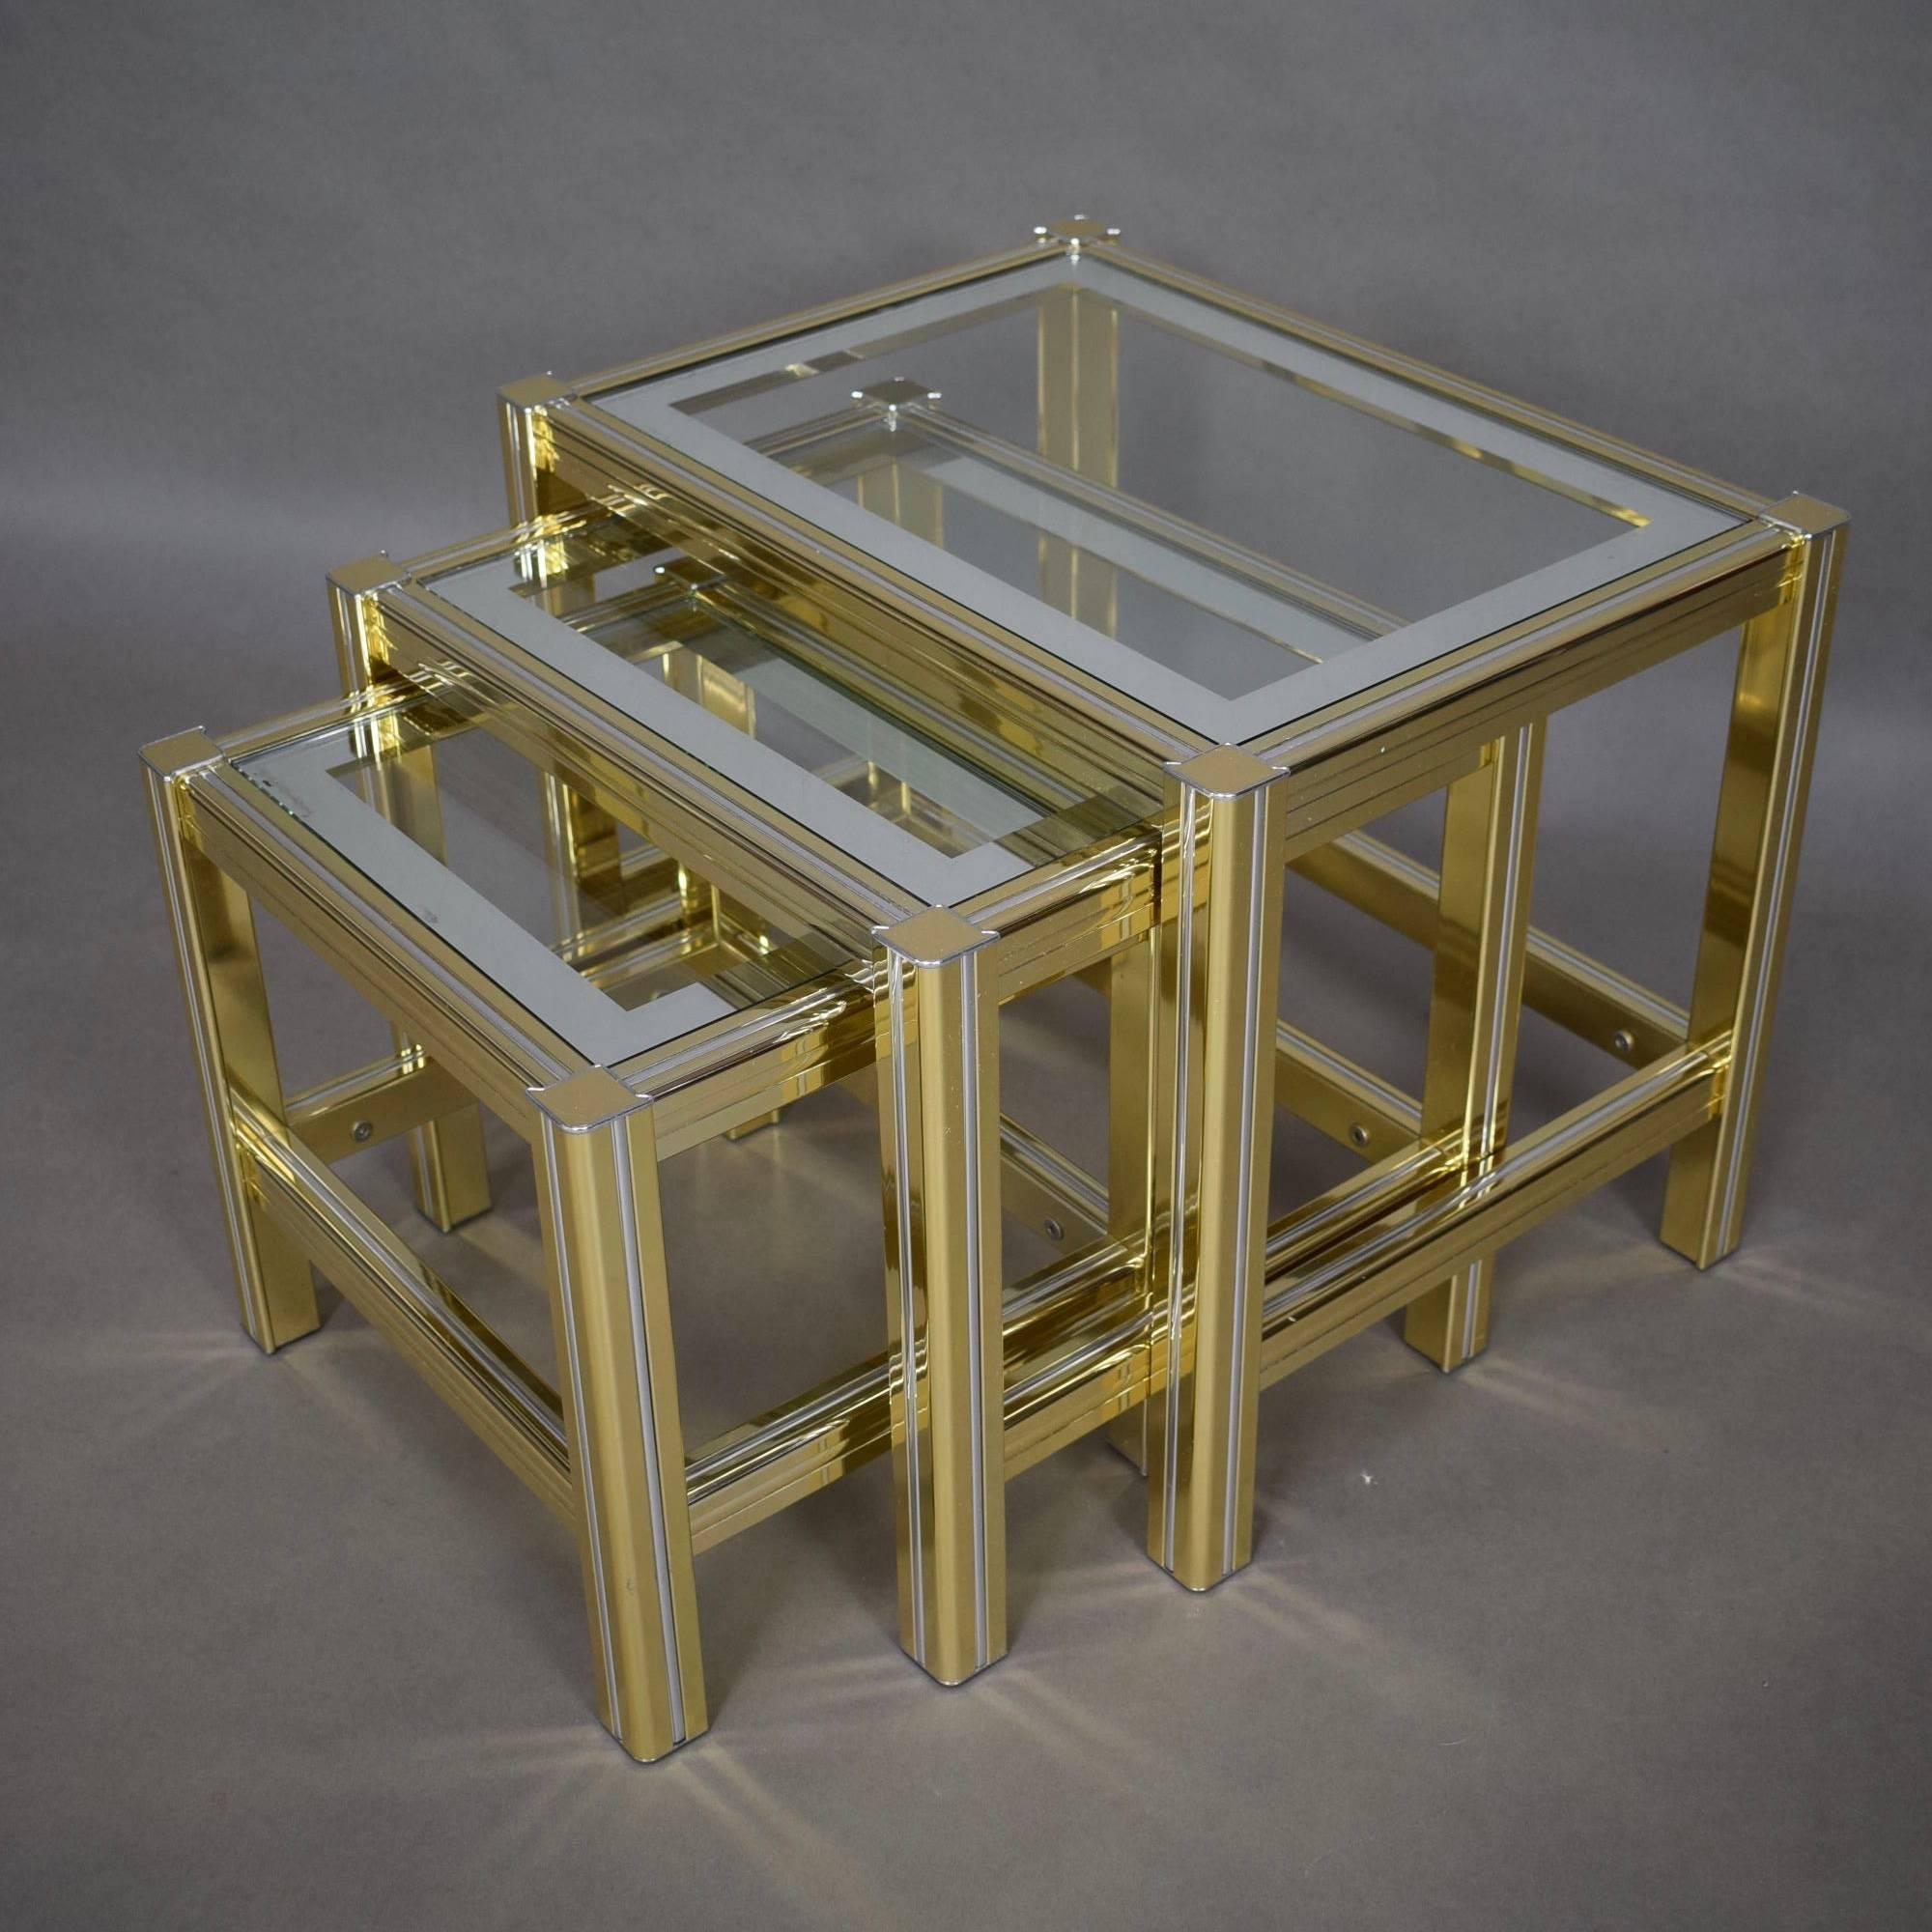 Set of three 1970s nesting tables in brass and (mirror) glass.

Designer: Willy Rizzo / Pierre Vandel style

Manufacturer: Unknown

Country: Belgium, Italy or France

Model: Nesting tables

Designed in: 1970s

Date of manufacturing: